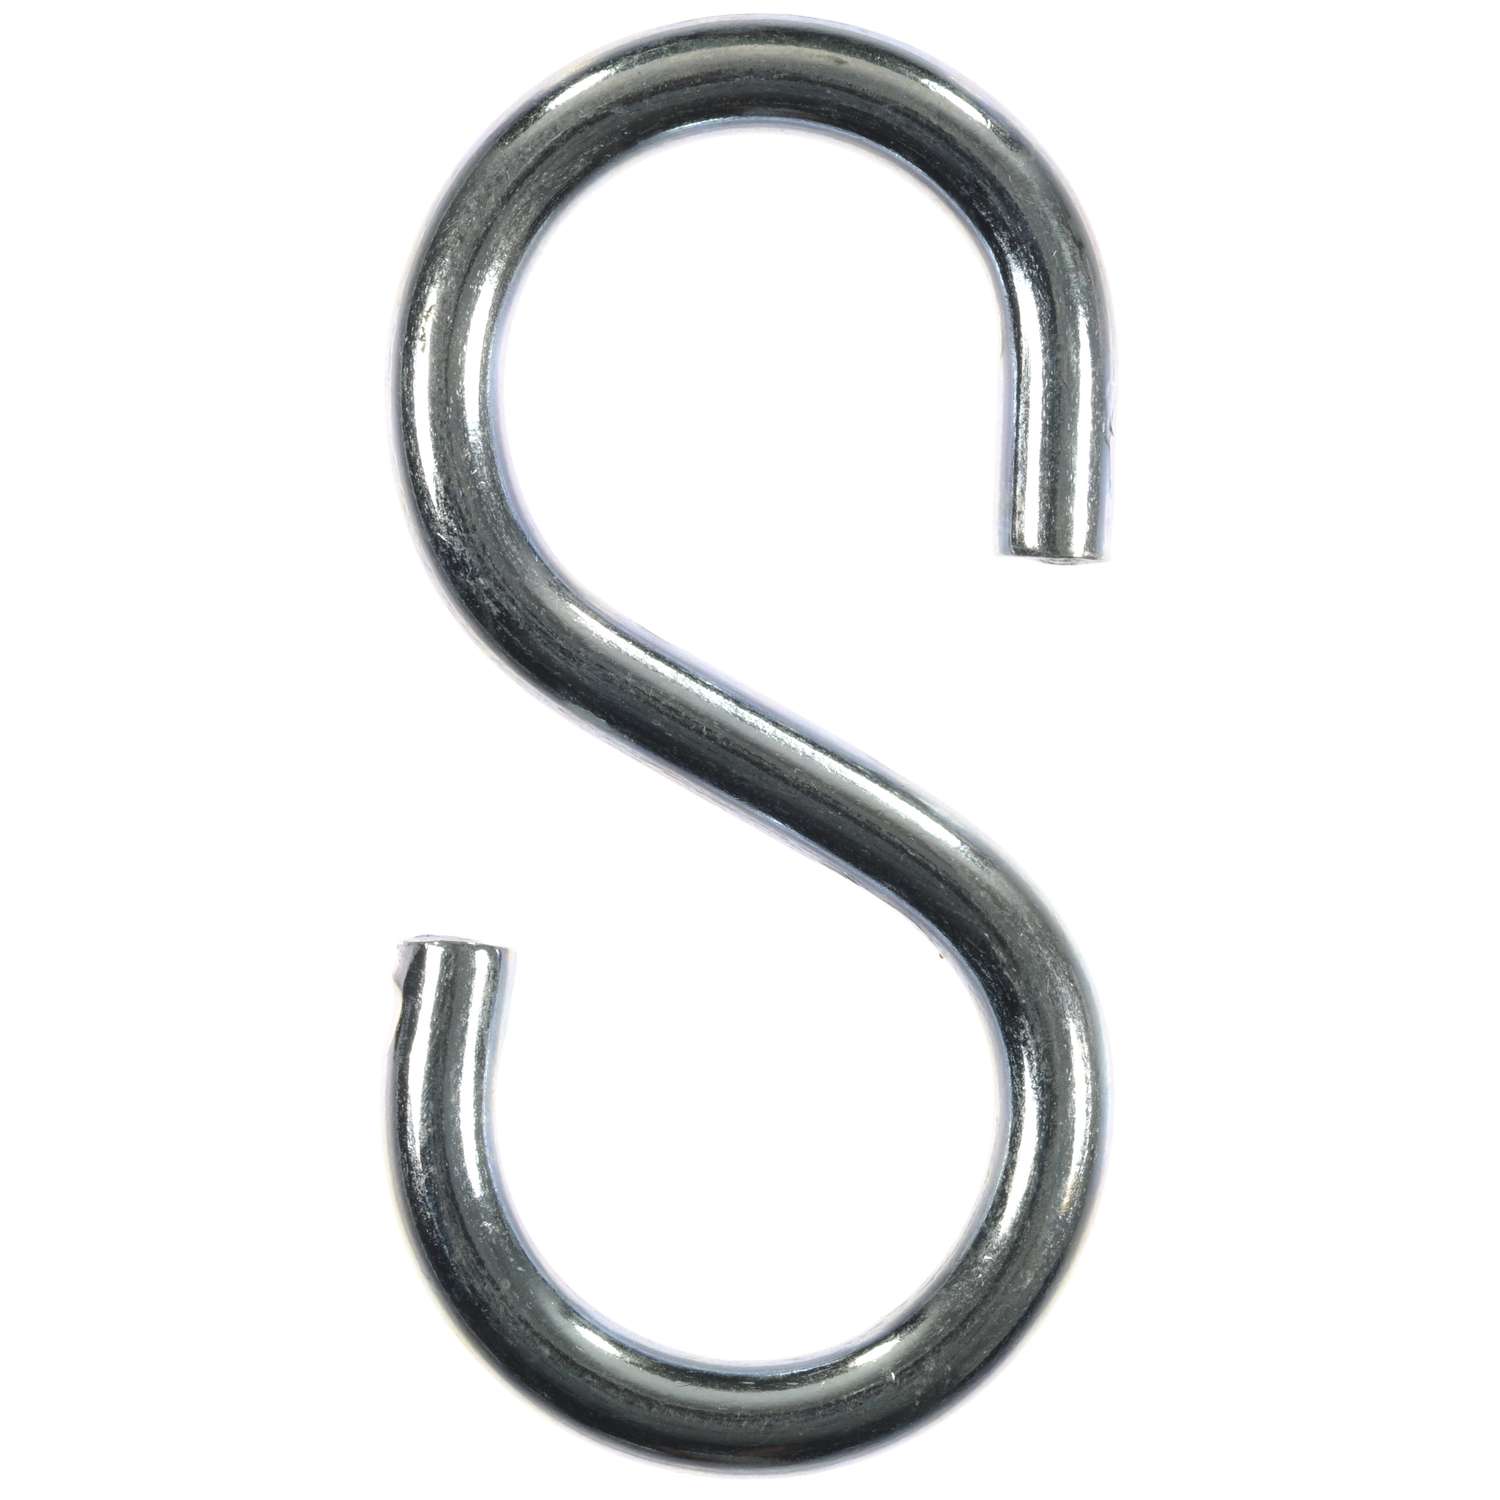 Guard 10 Pack 5 Inch Round S Hooks,S Shaped Anti-Corrosion Durable Heavy Duty S Type Hooks Kitchen Pot Pan Utensils Hanger Clothes Storage Rack,Multiple Use,Solid 304 Stainless Steel Finish,X-Large 